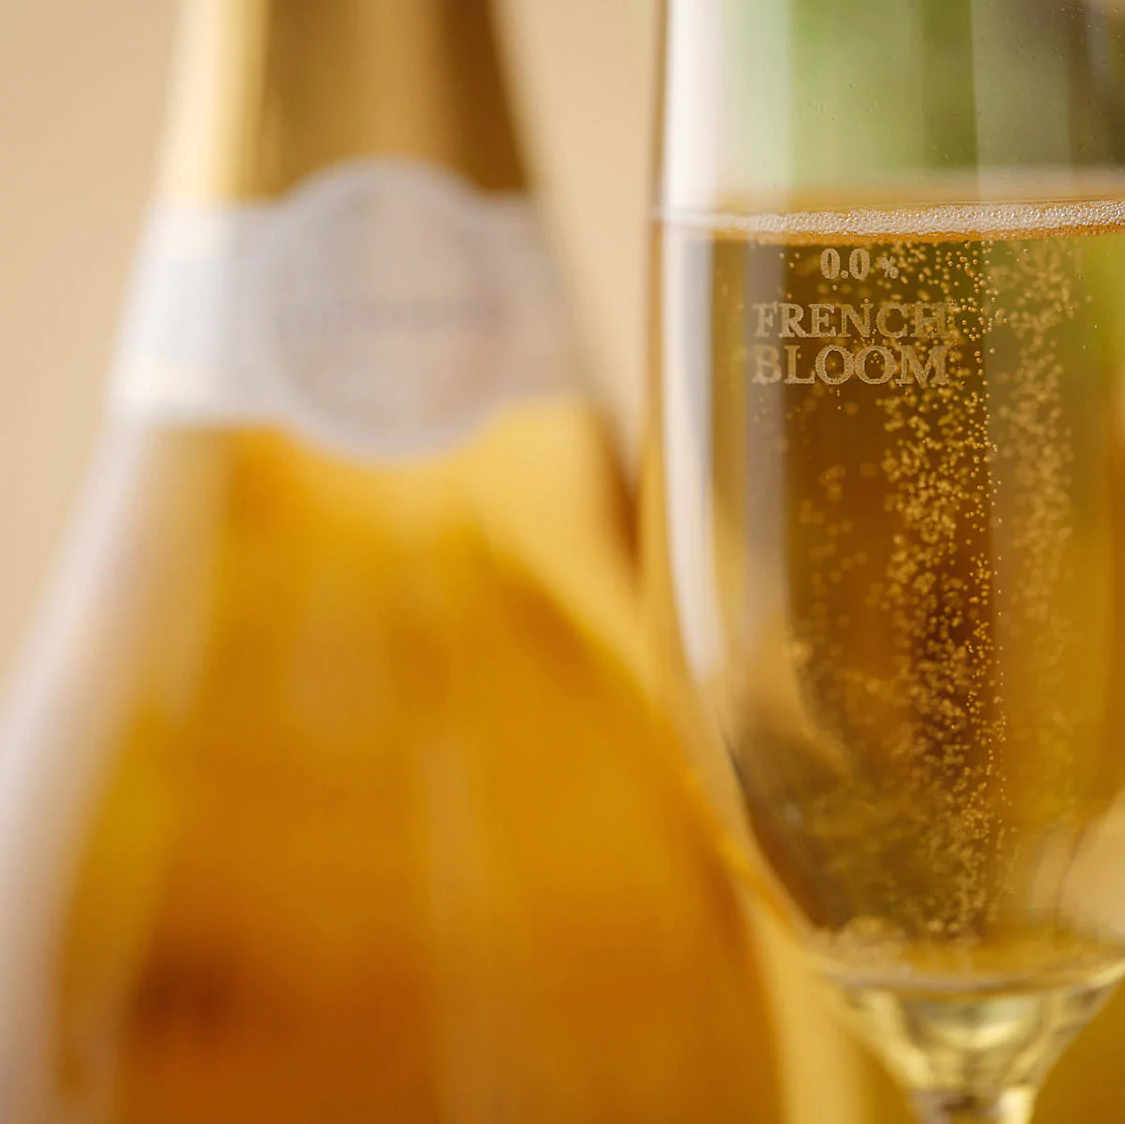 French Bloom Sparkling Non Alcoholic Wine - Le Blanc, close up of glass